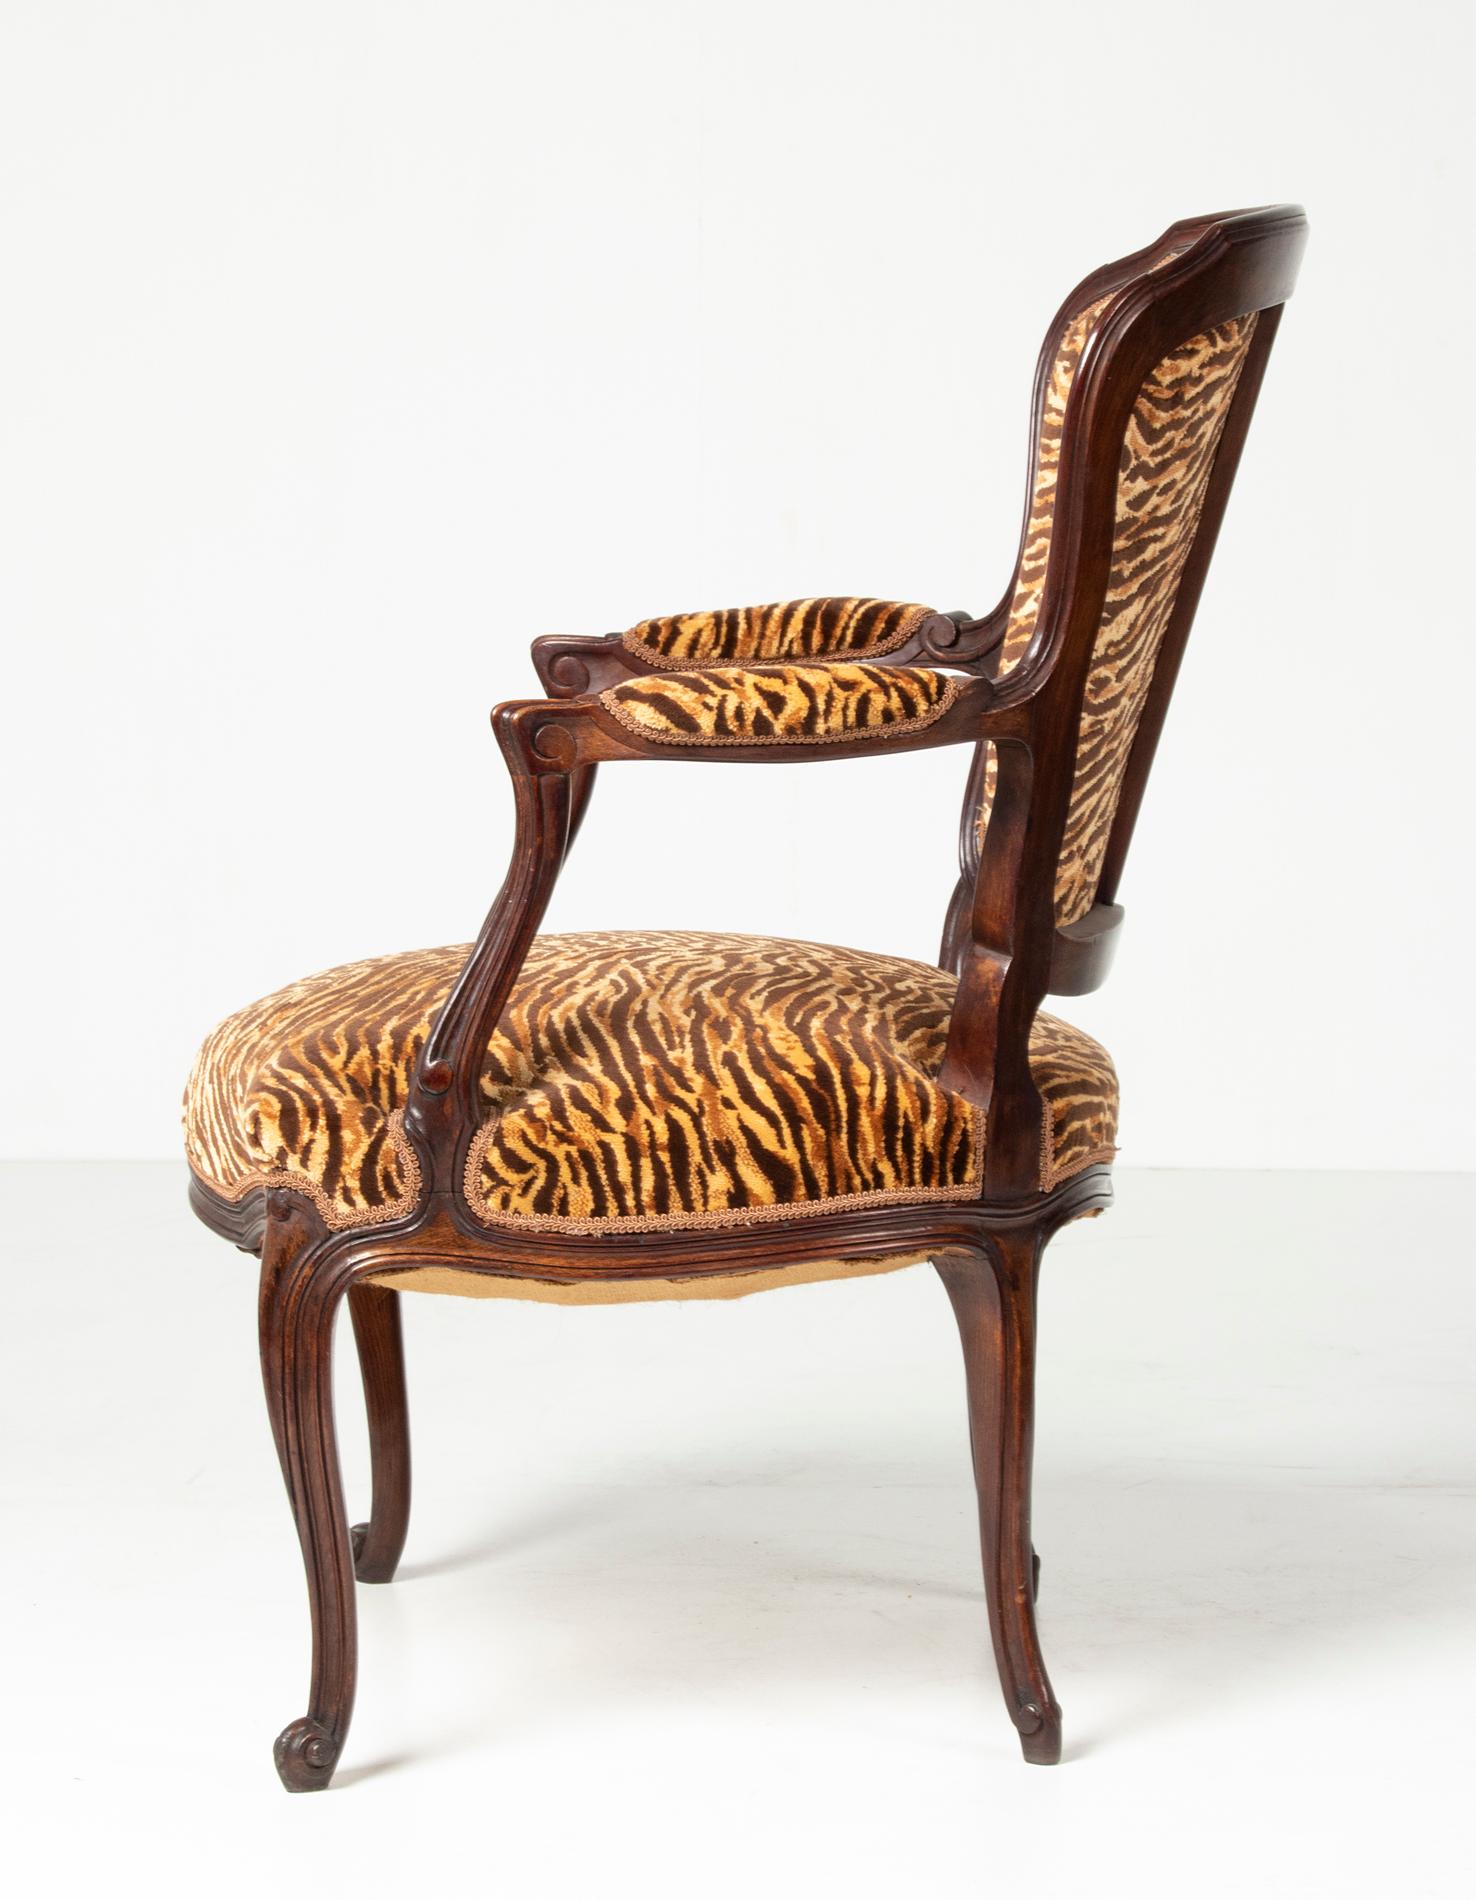 Pair of Early 20th Century French Cabriolet Arm Chairs with Tiger Print Fabric 2